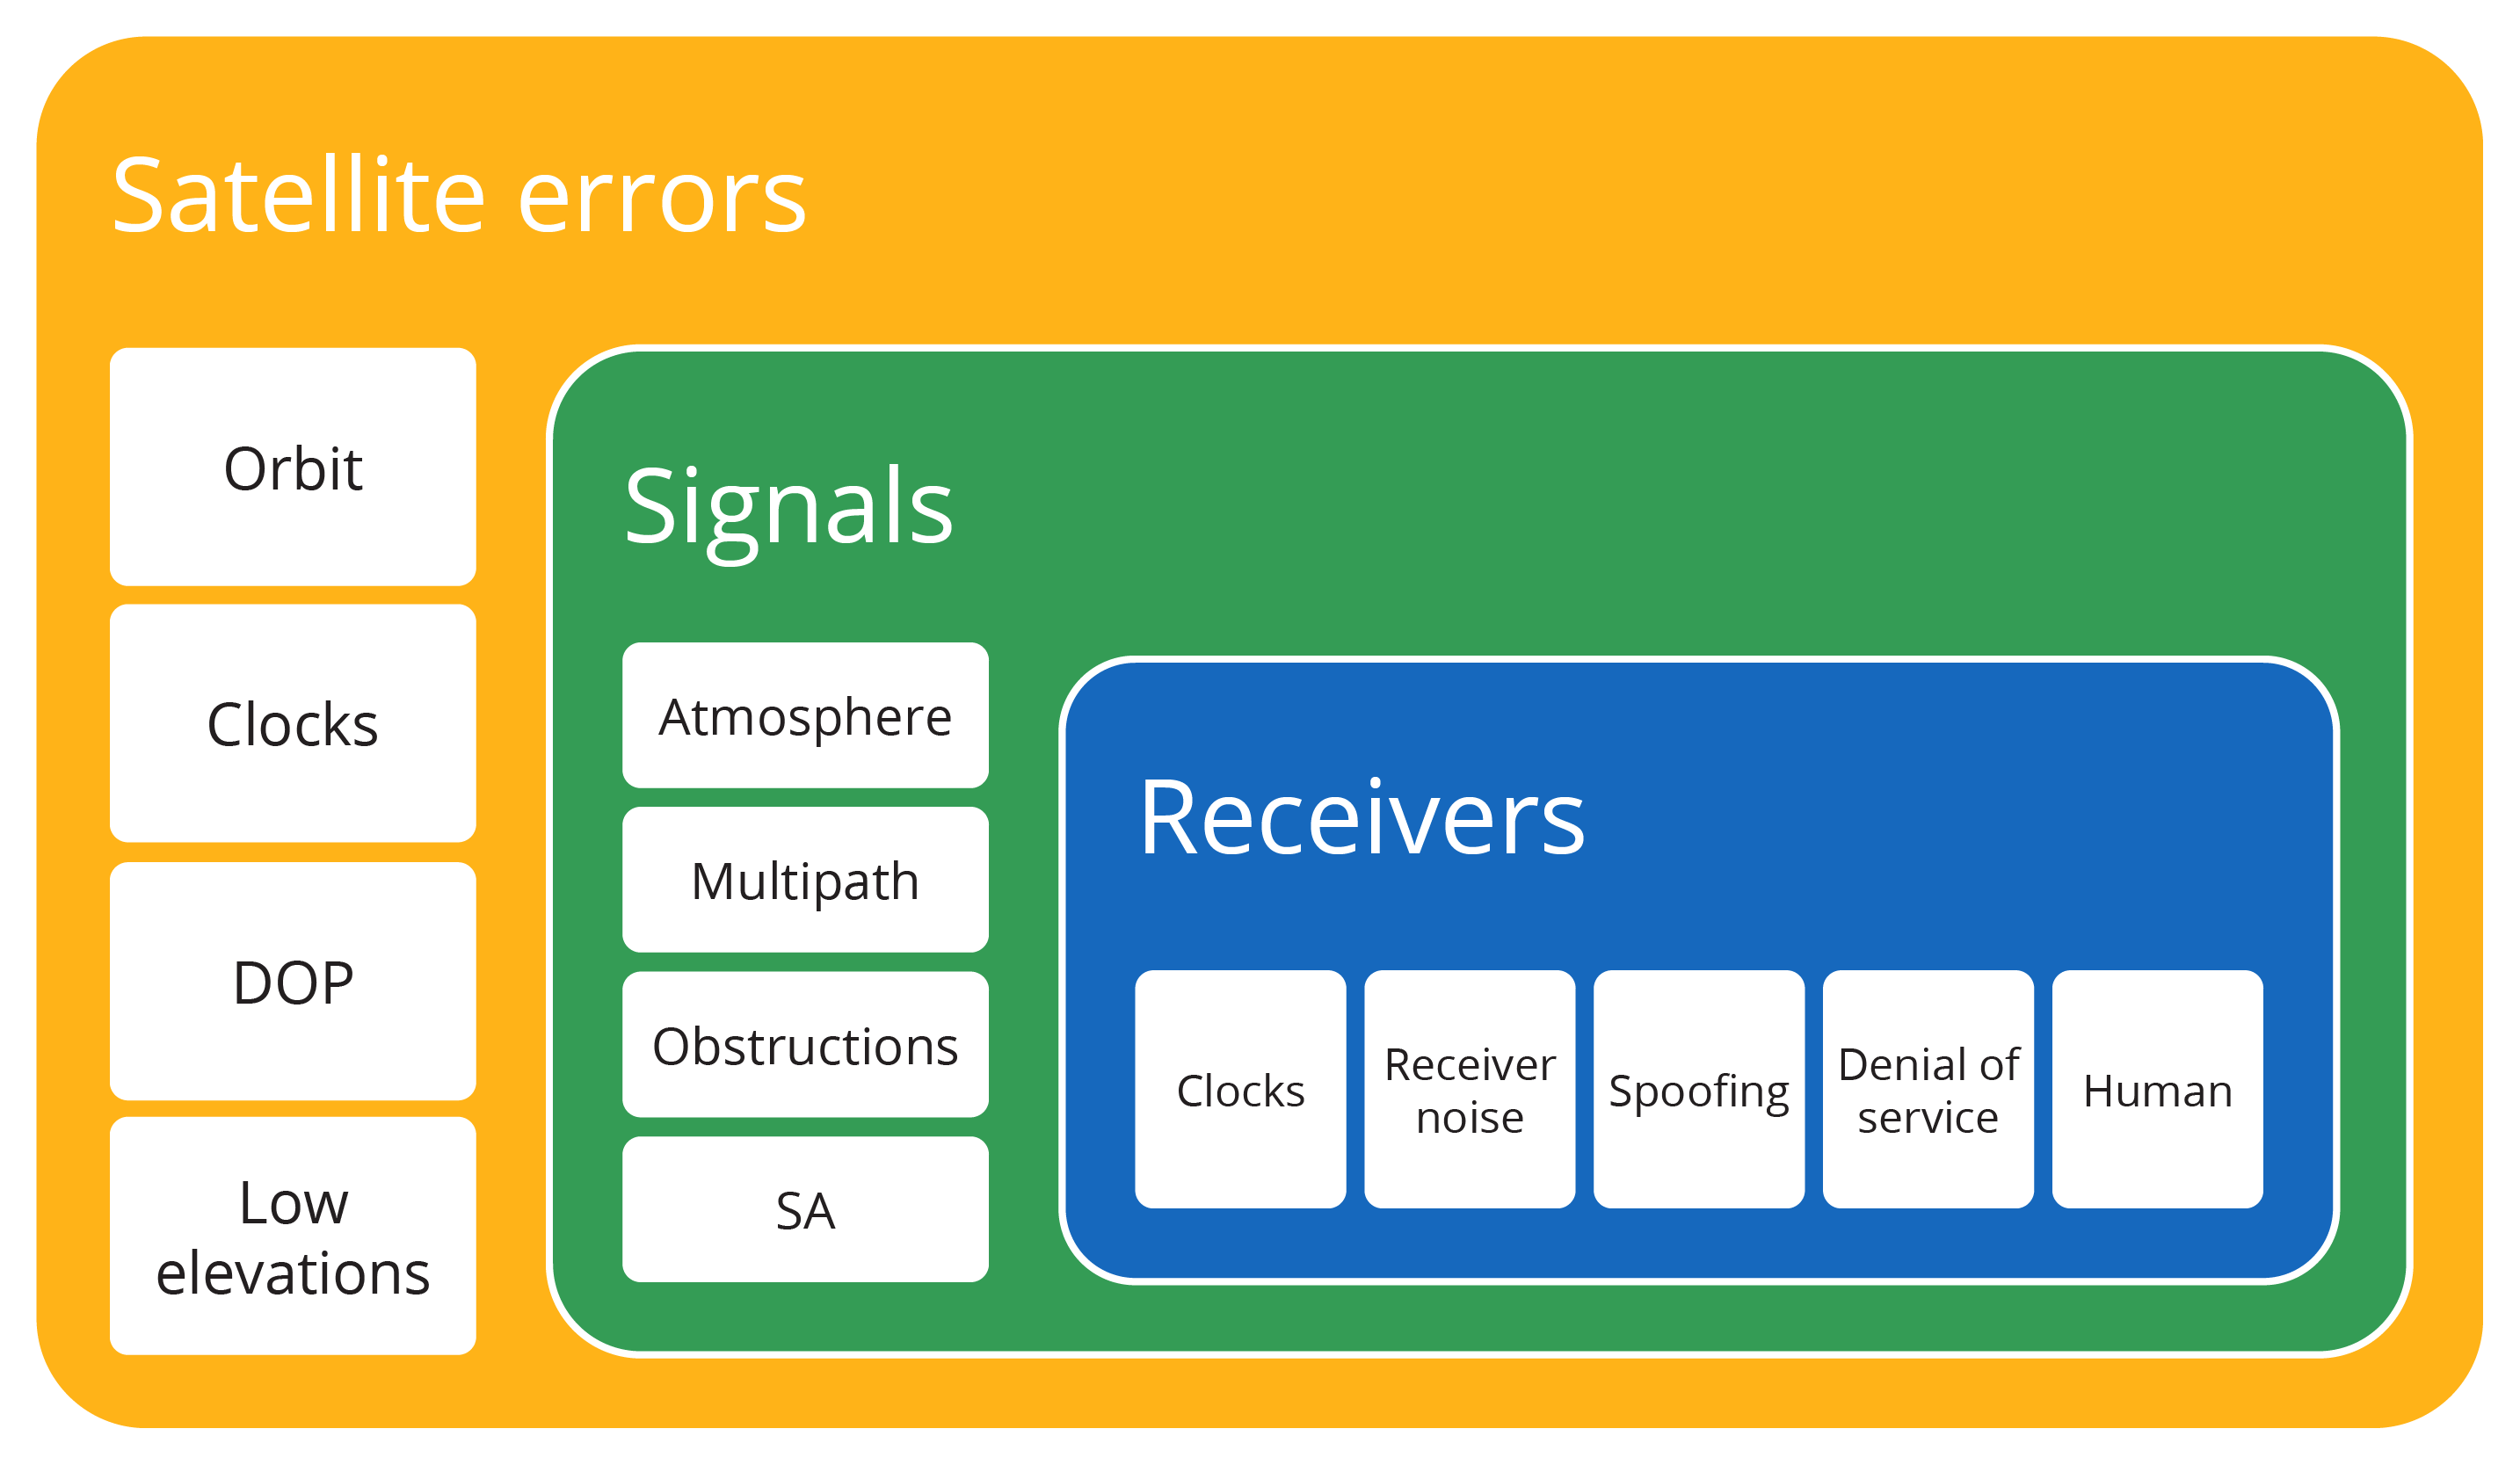 Diagram showing satellite errors, signals and receivers. The errors are orbit, clocks, DOP and low elevations. The signals are atmosphere, multipath, obstructions and SA. The receivers are clocks, receiver noise, spoofing, denial of service and human.